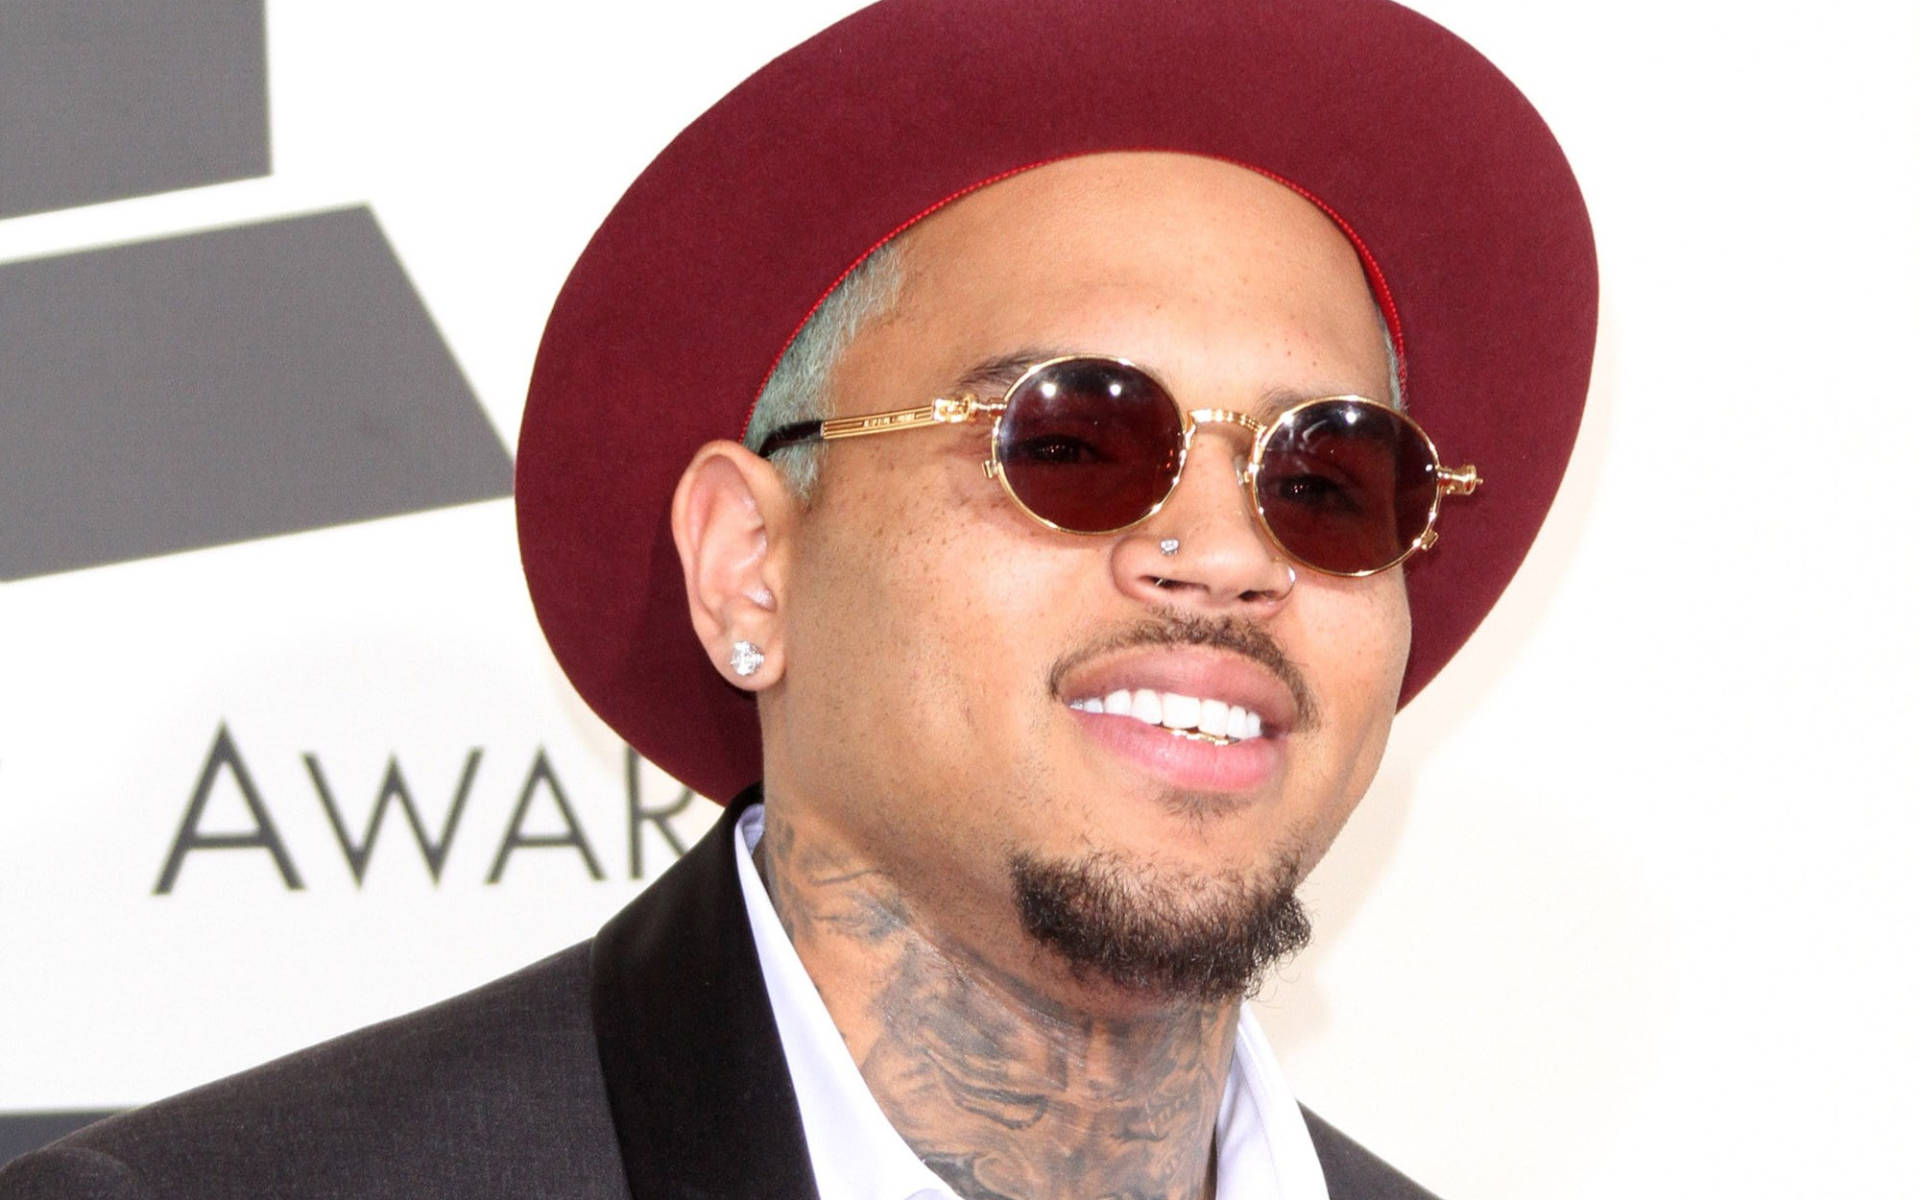 Chris Brown In Awards Event